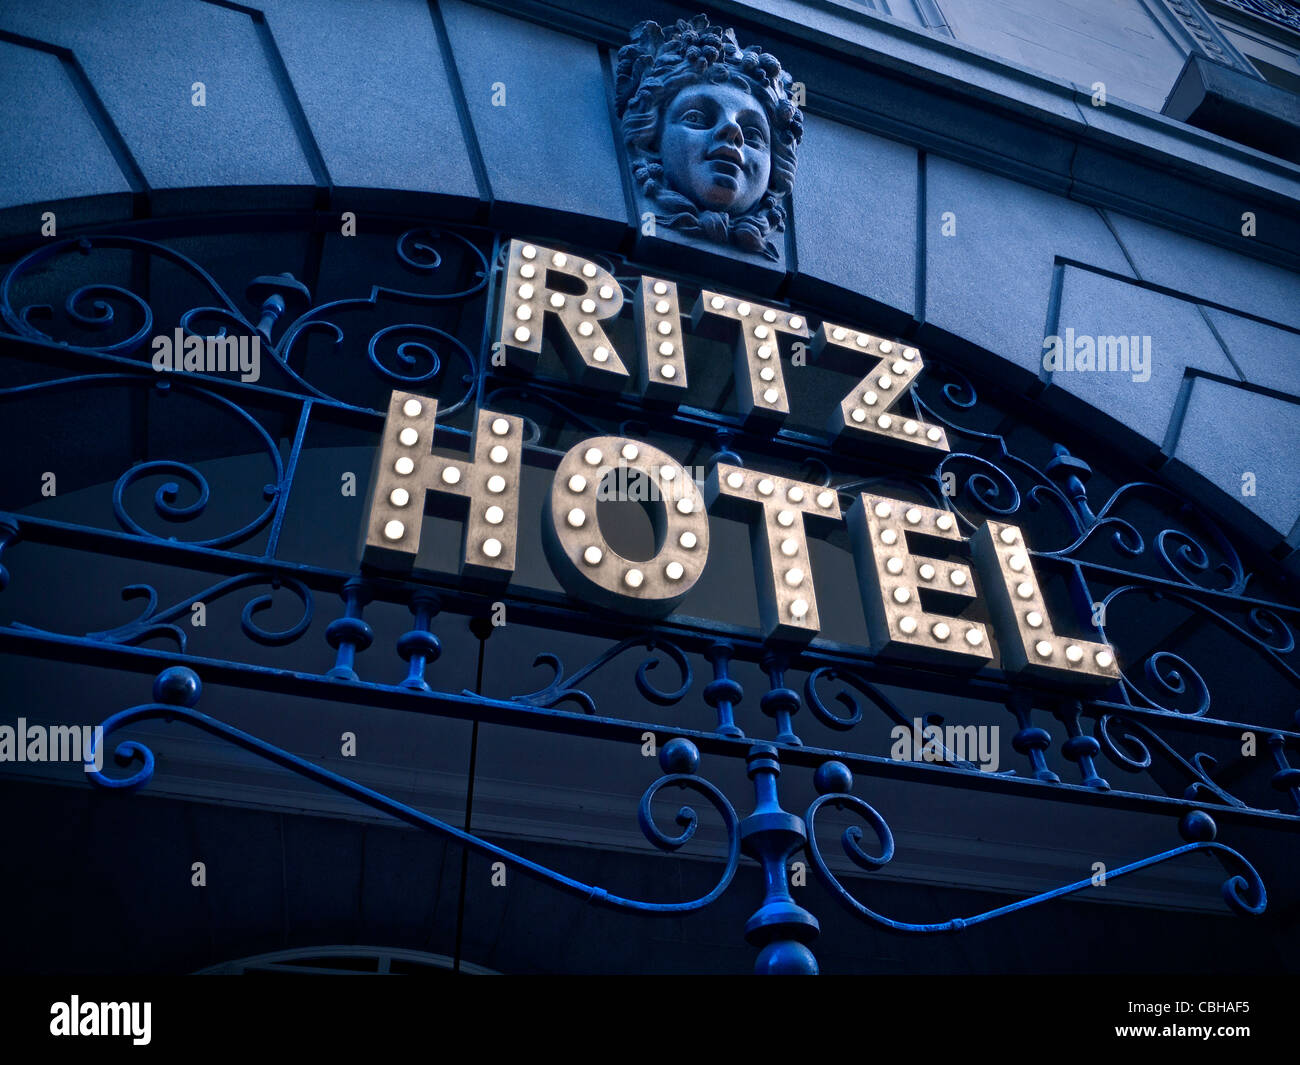 RITZ HOTEL SIGN LIGHTS DUSK Entrance sign to The Ritz Hotel a discreet luxury 5-star hotel in Piccadilly London UK Stock Photo